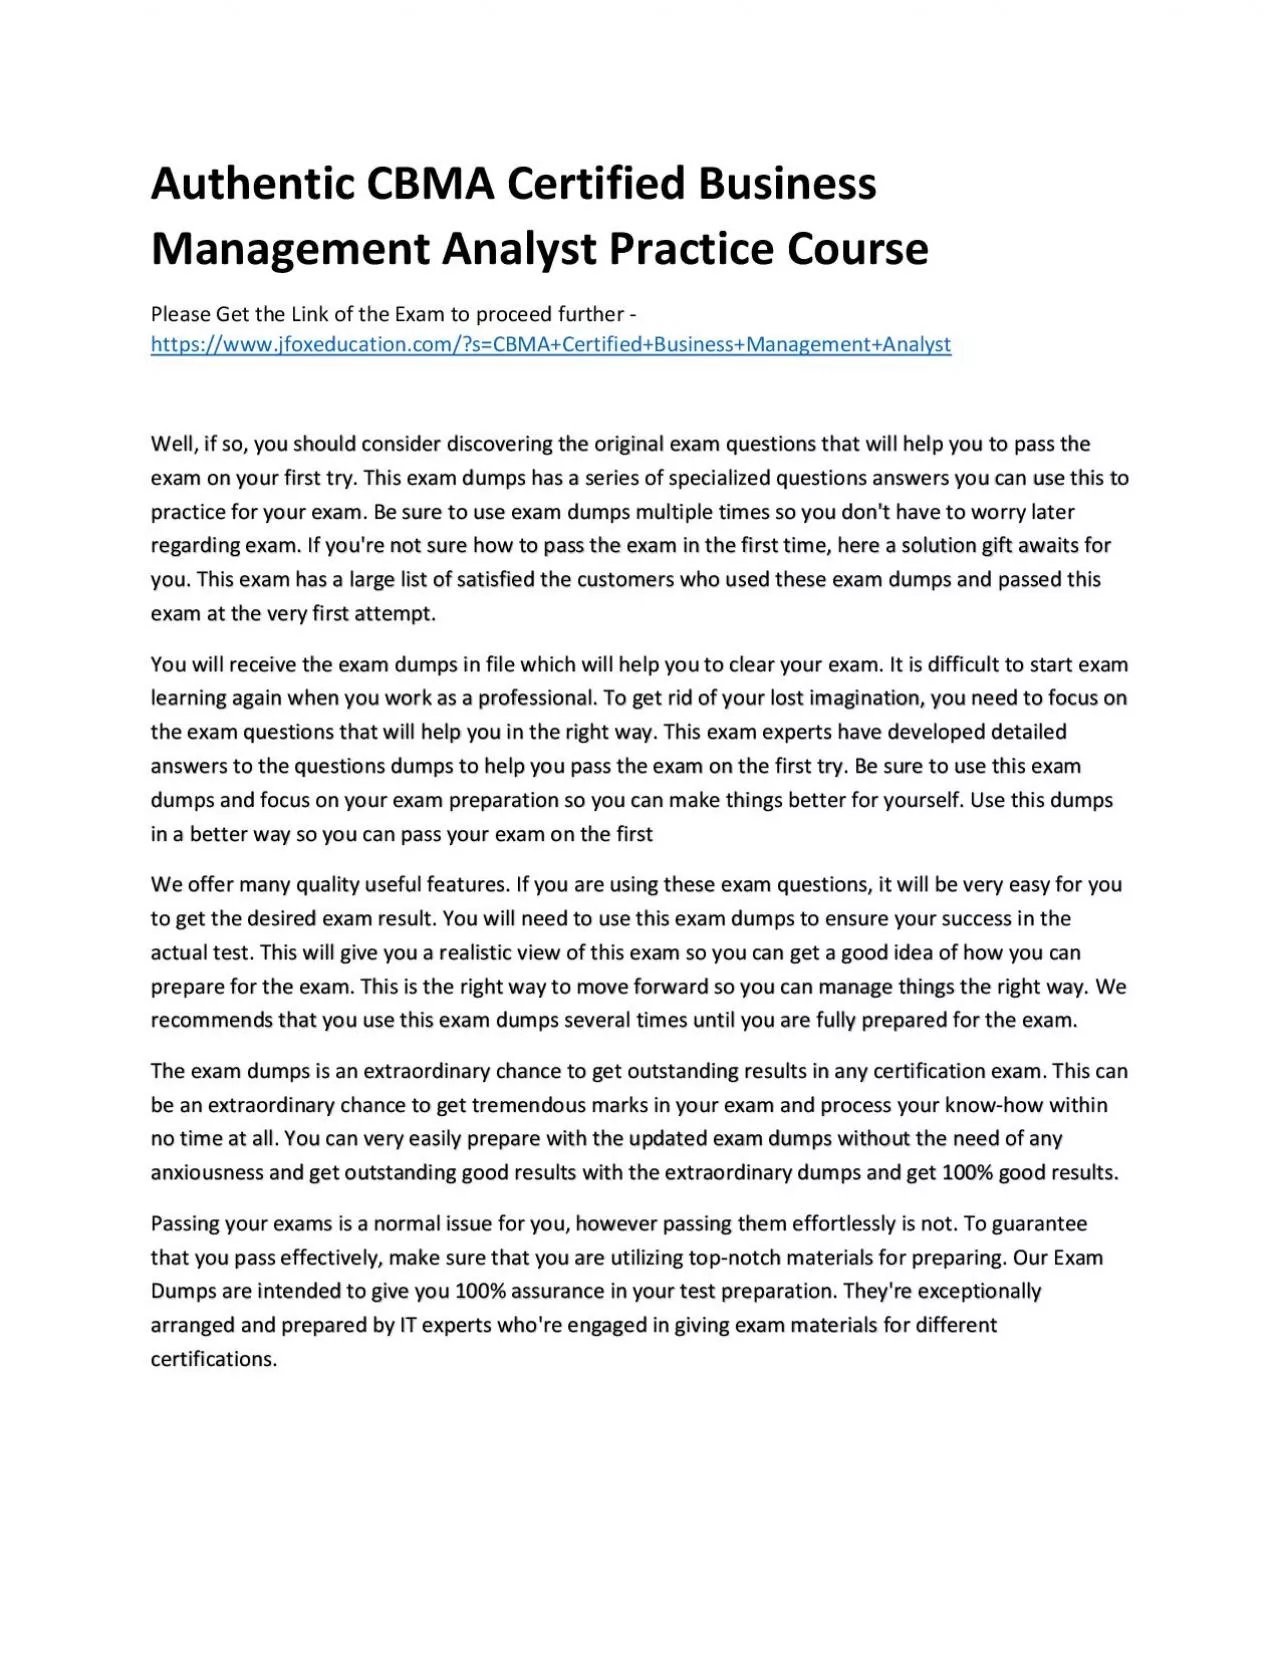 Authentic CBMA Certified Business Management Analyst Practice Course